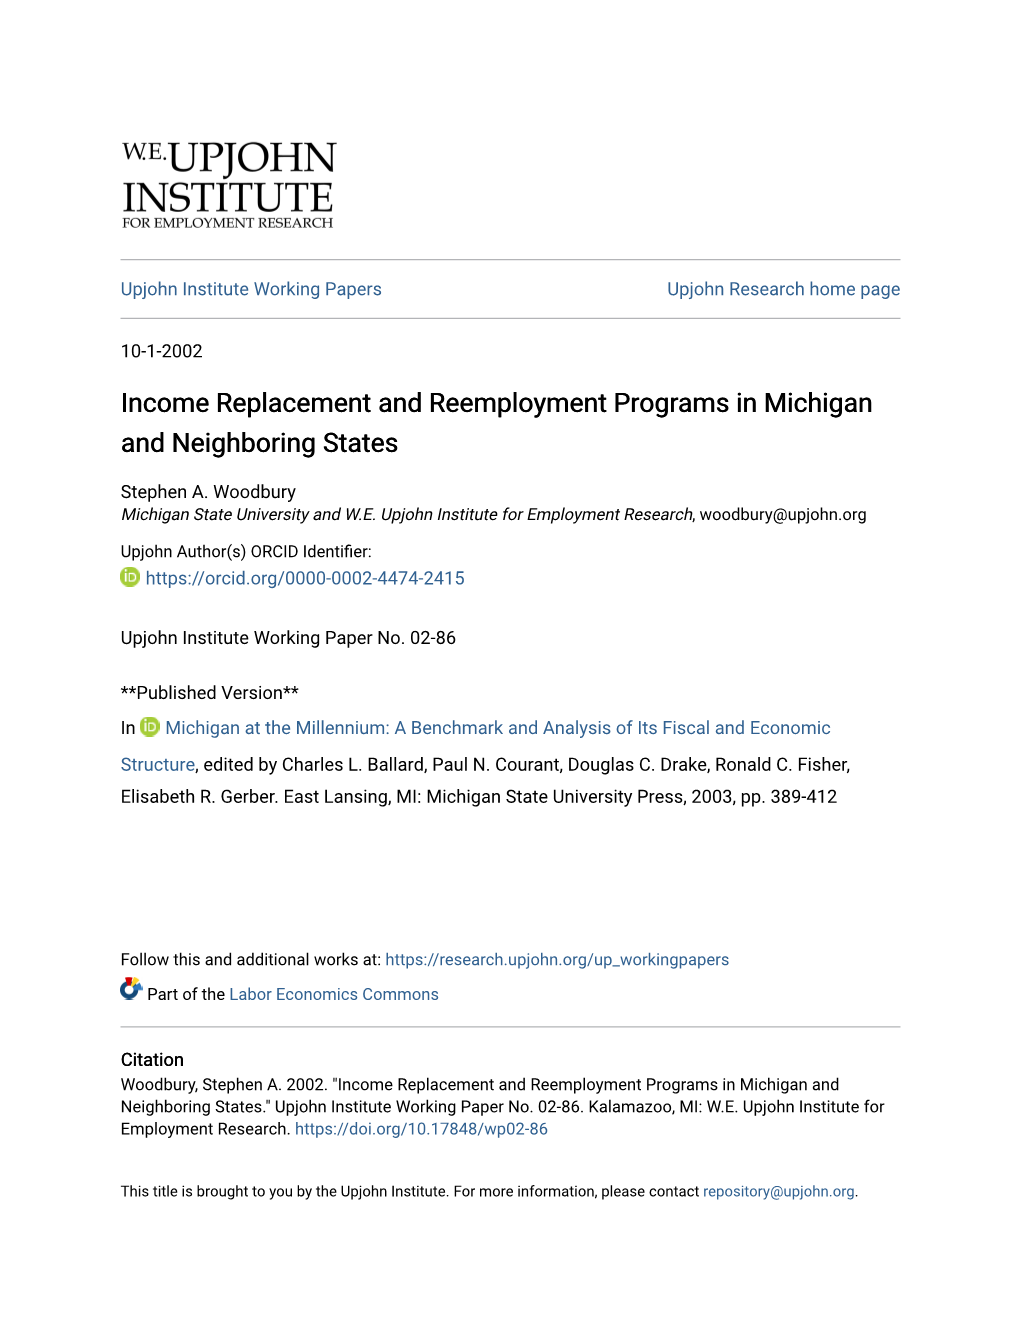 Income Replacement and Reemployment Programs in Michigan and Neighboring States